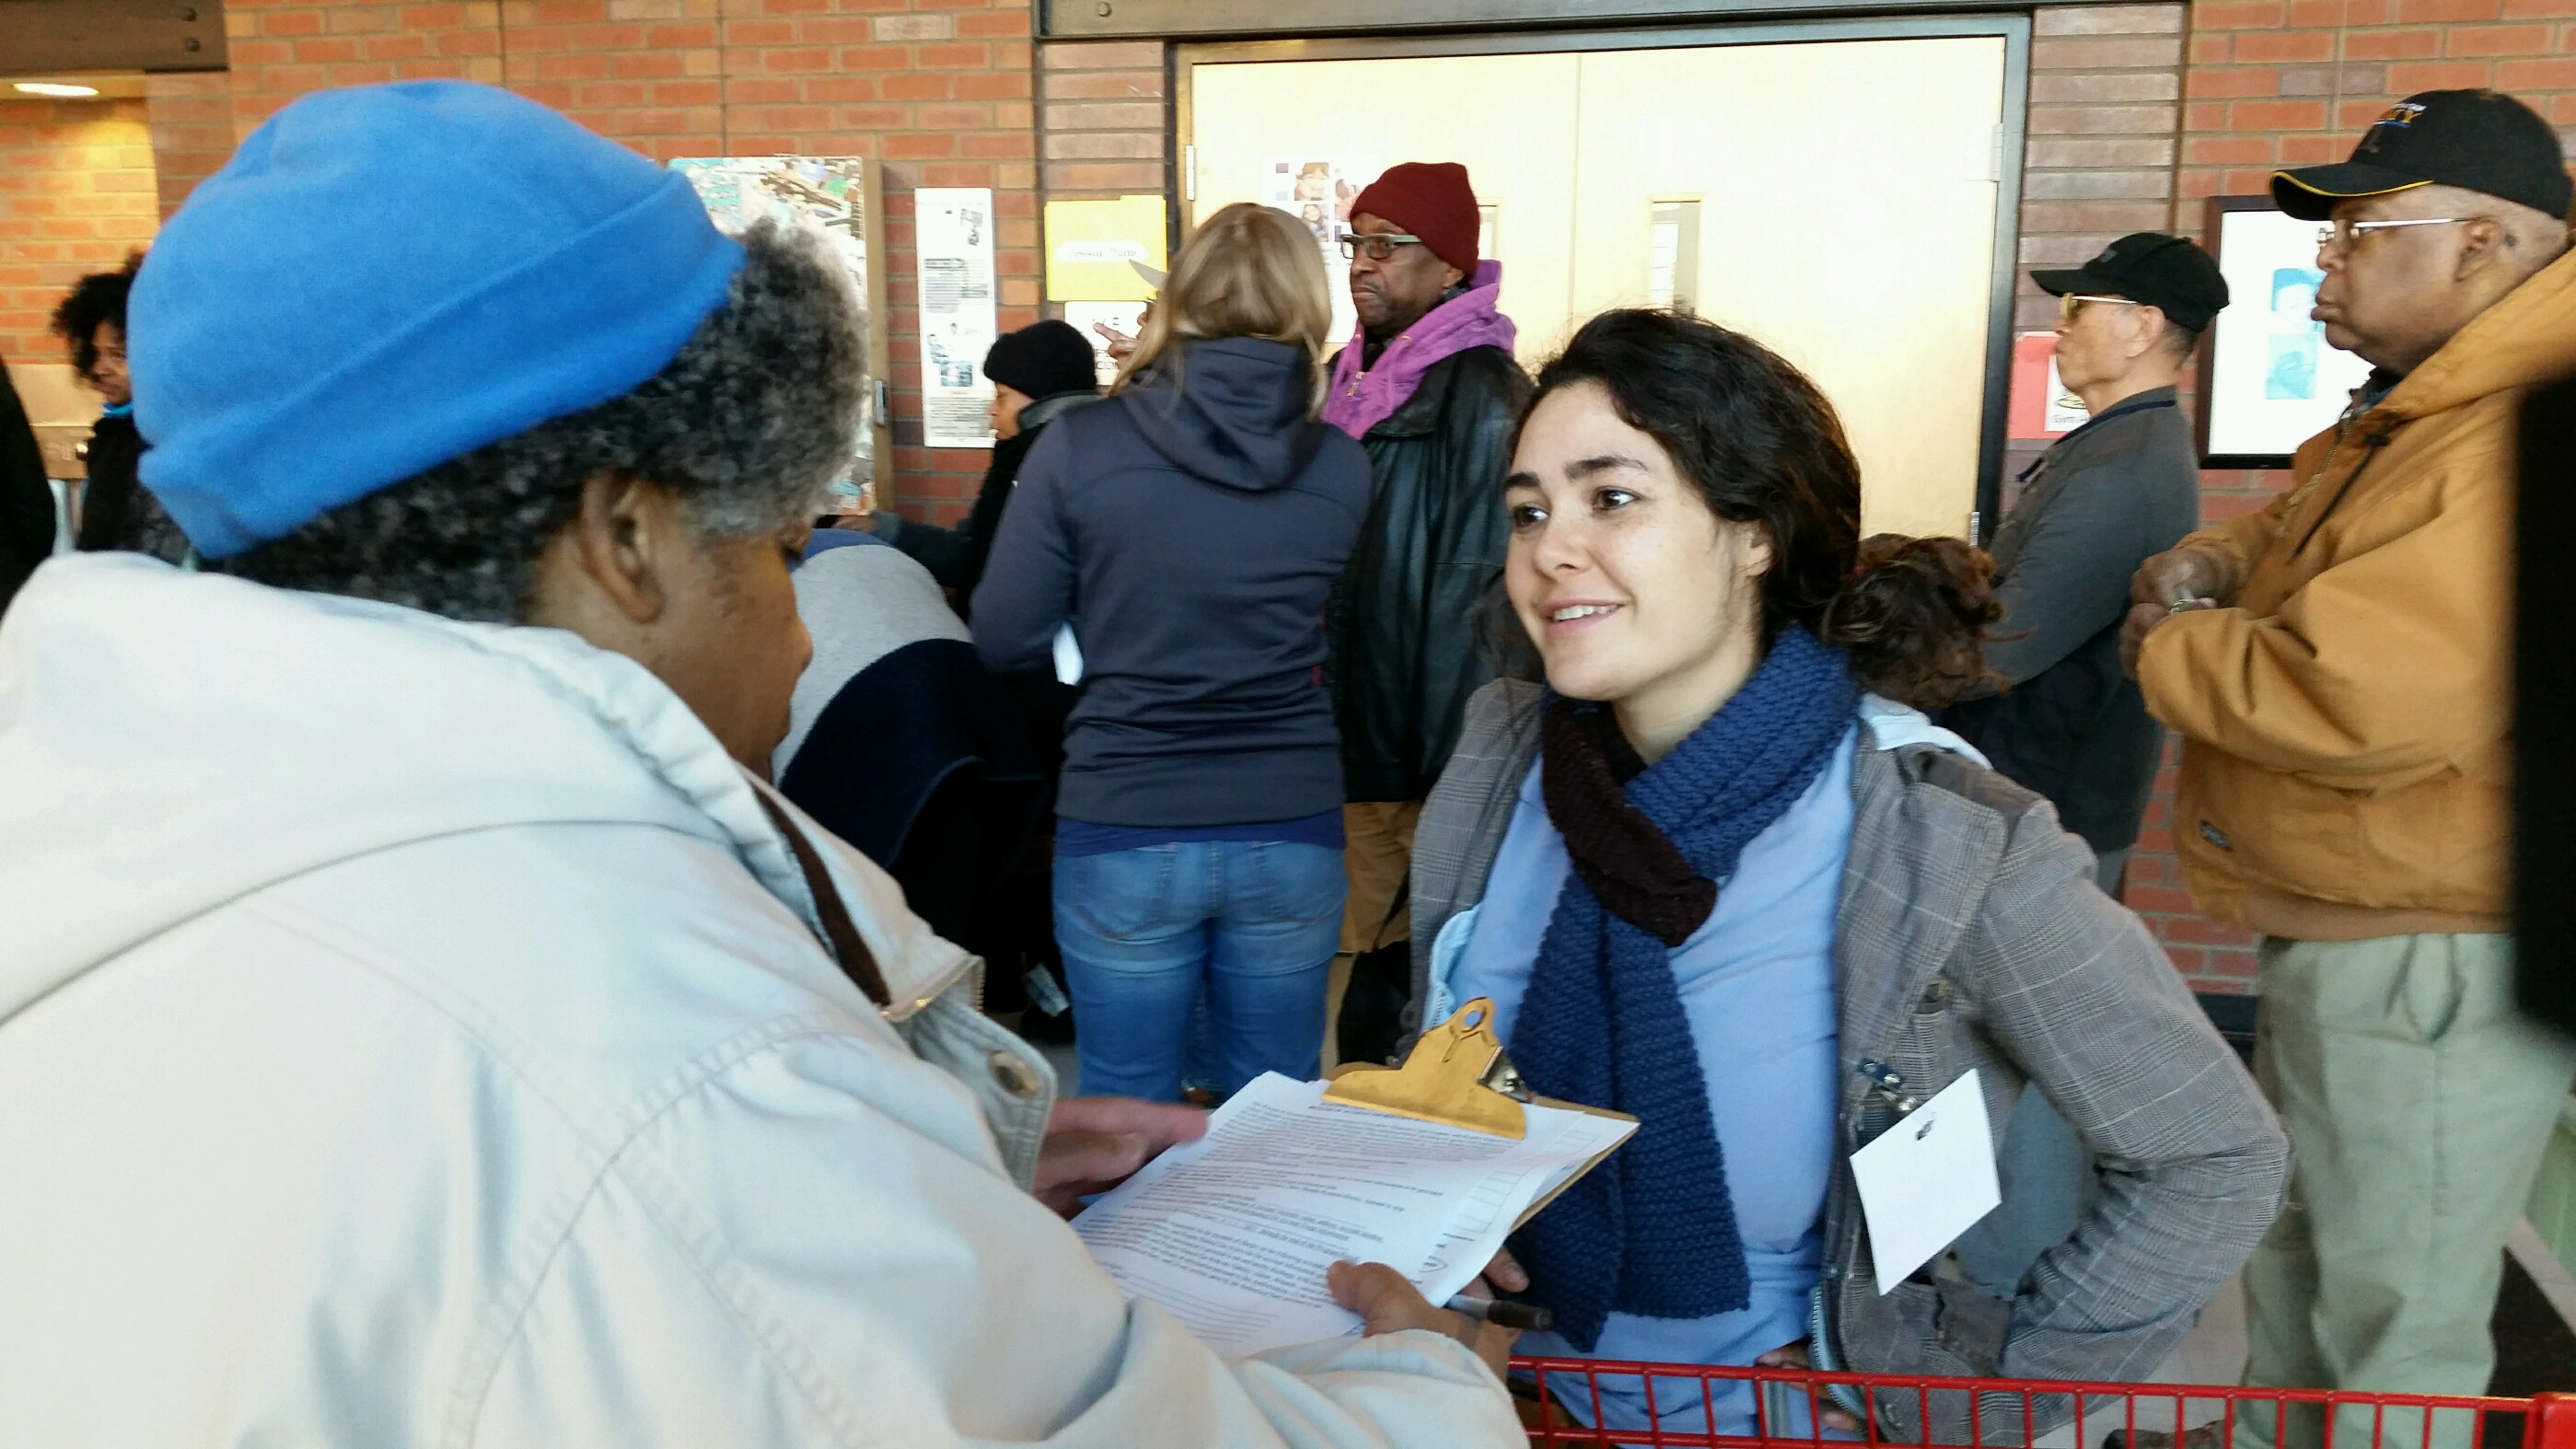 Sierra Club Ready for 100 Organizer Eva Resnick-Day is gesturing to Homewood resident as she signs up for Grassroots Green Homes program clipboard in hand at the Community Food Bank